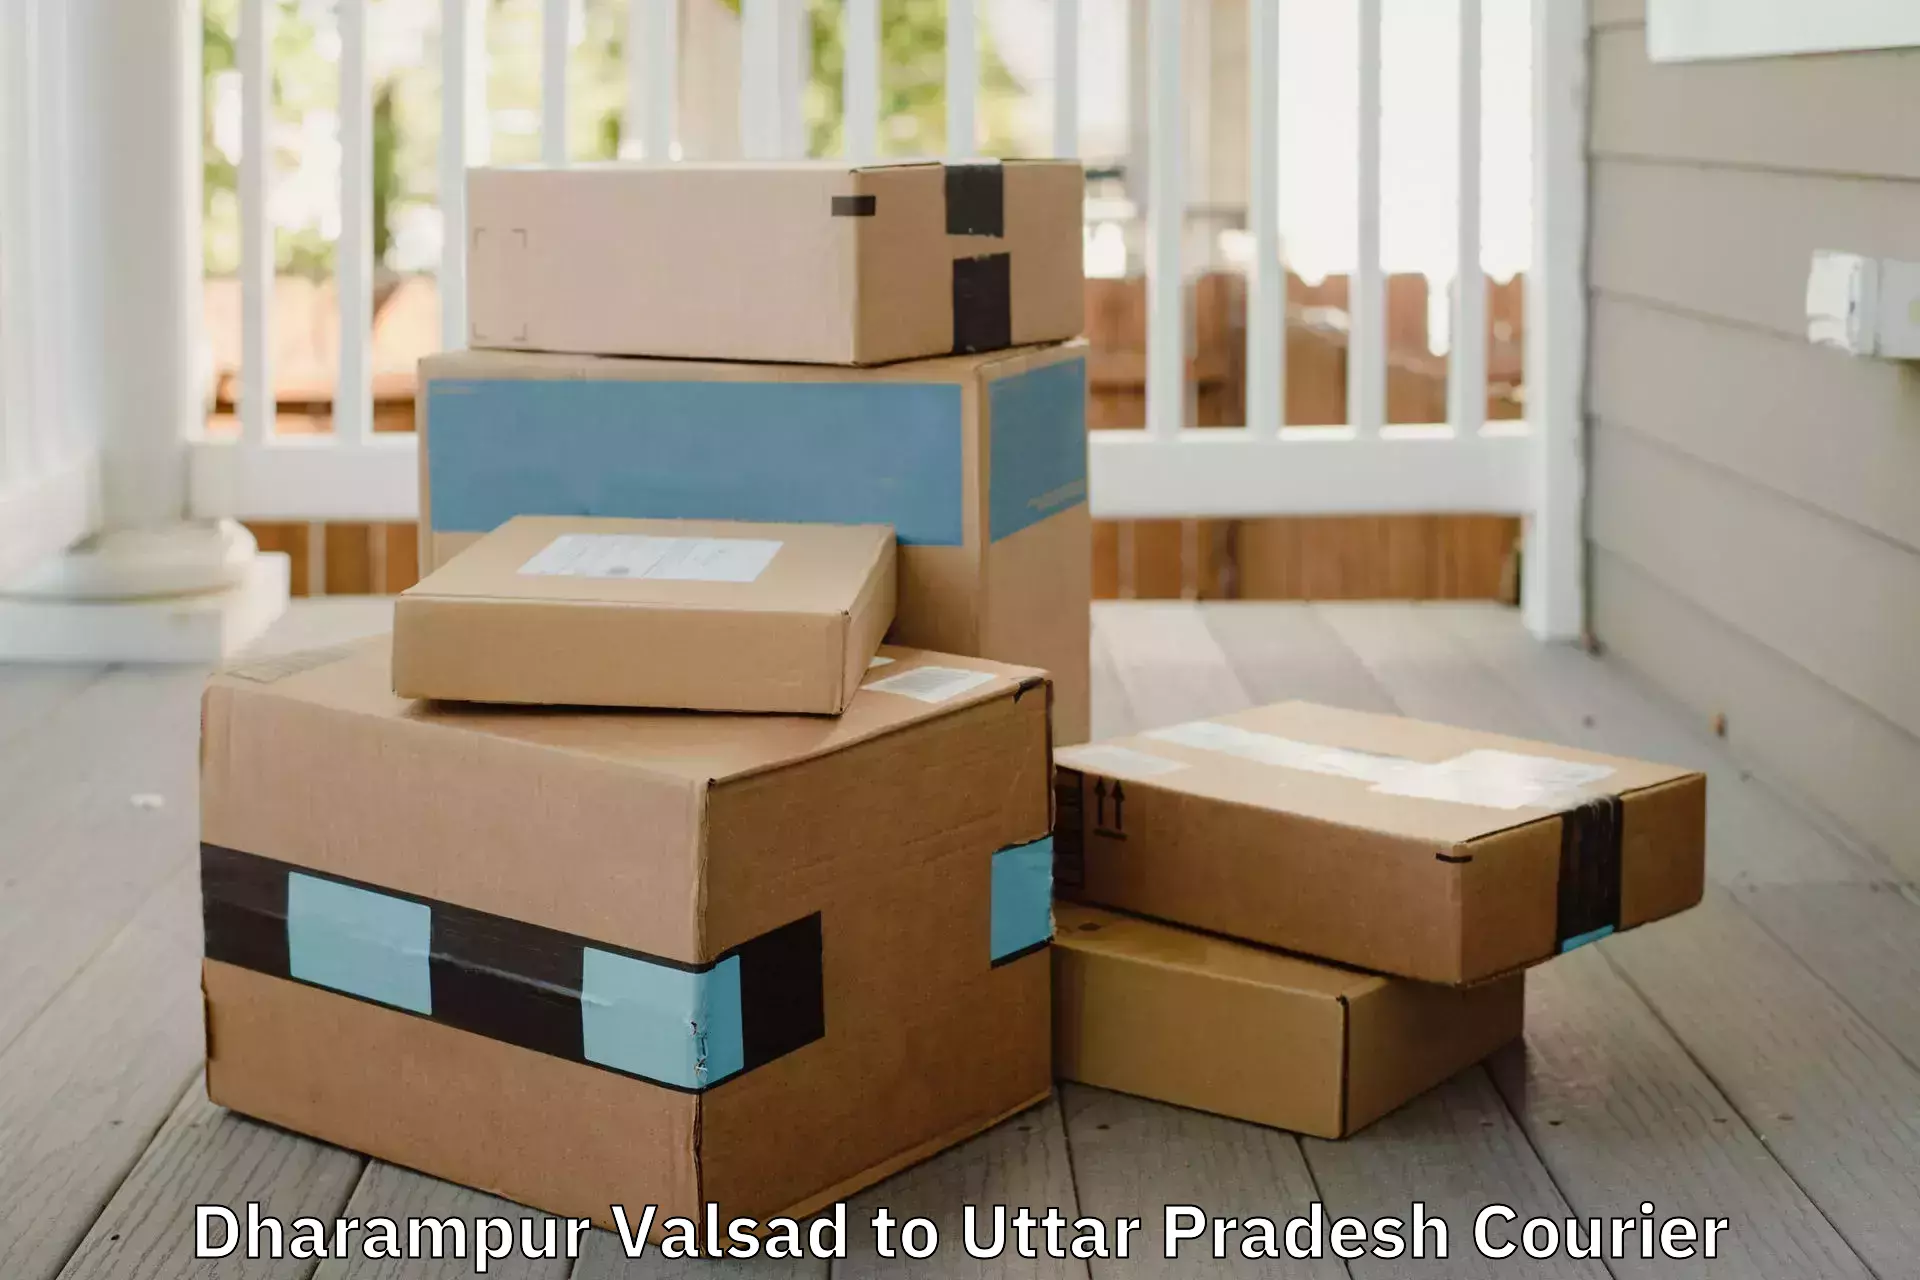 Affordable relocation solutions in Dharampur Valsad to Chhata